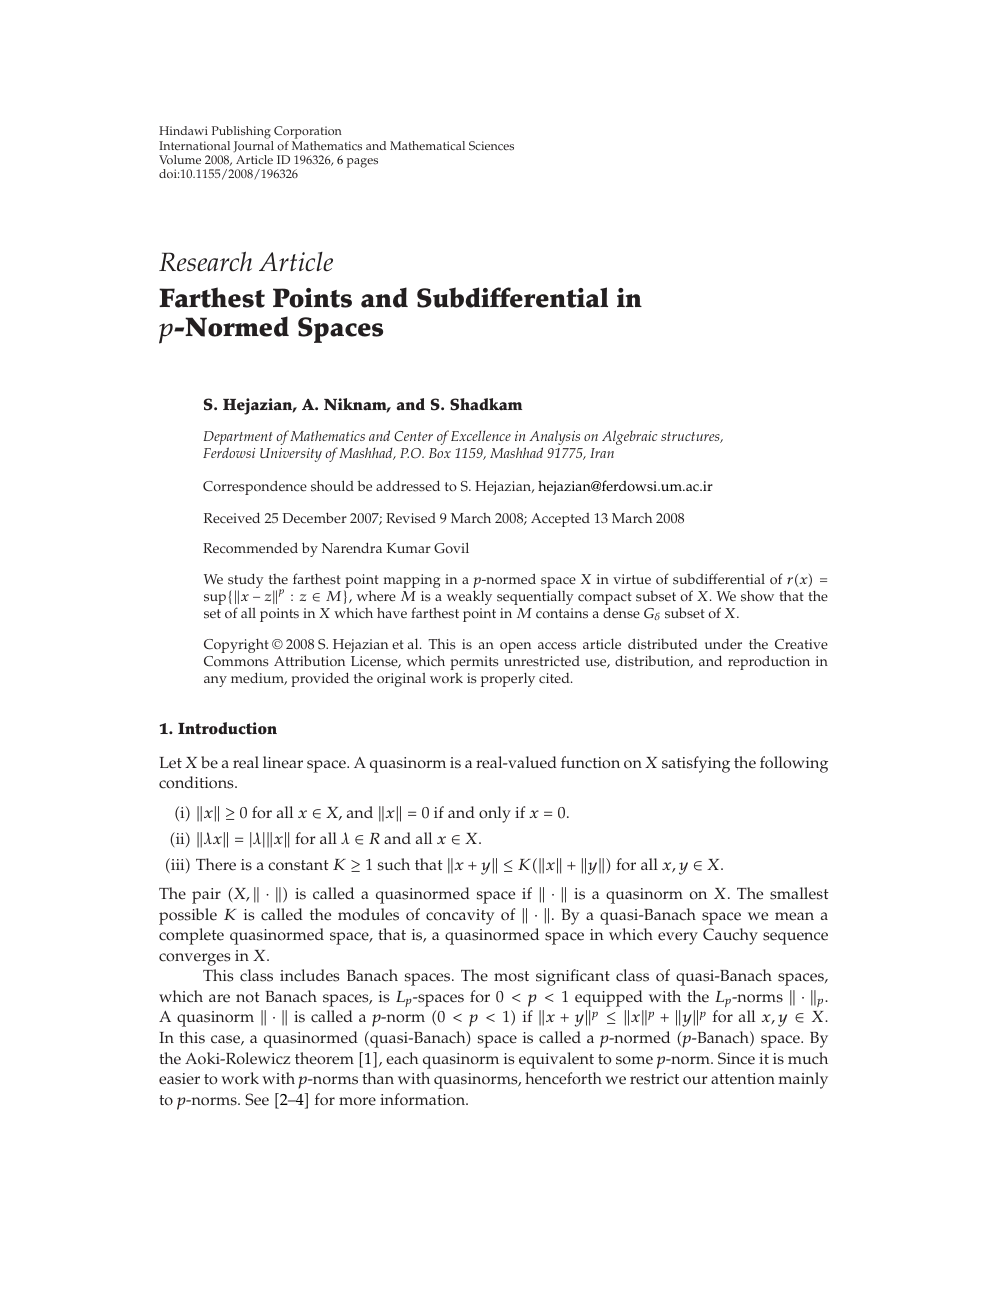 Farthest Points And Subdifferential In 𝑝 Normed Spaces Topic Of Research Paper In Mathematics Download Scholarly Article Pdf And Read For Free On Cyberleninka Open Science Hub